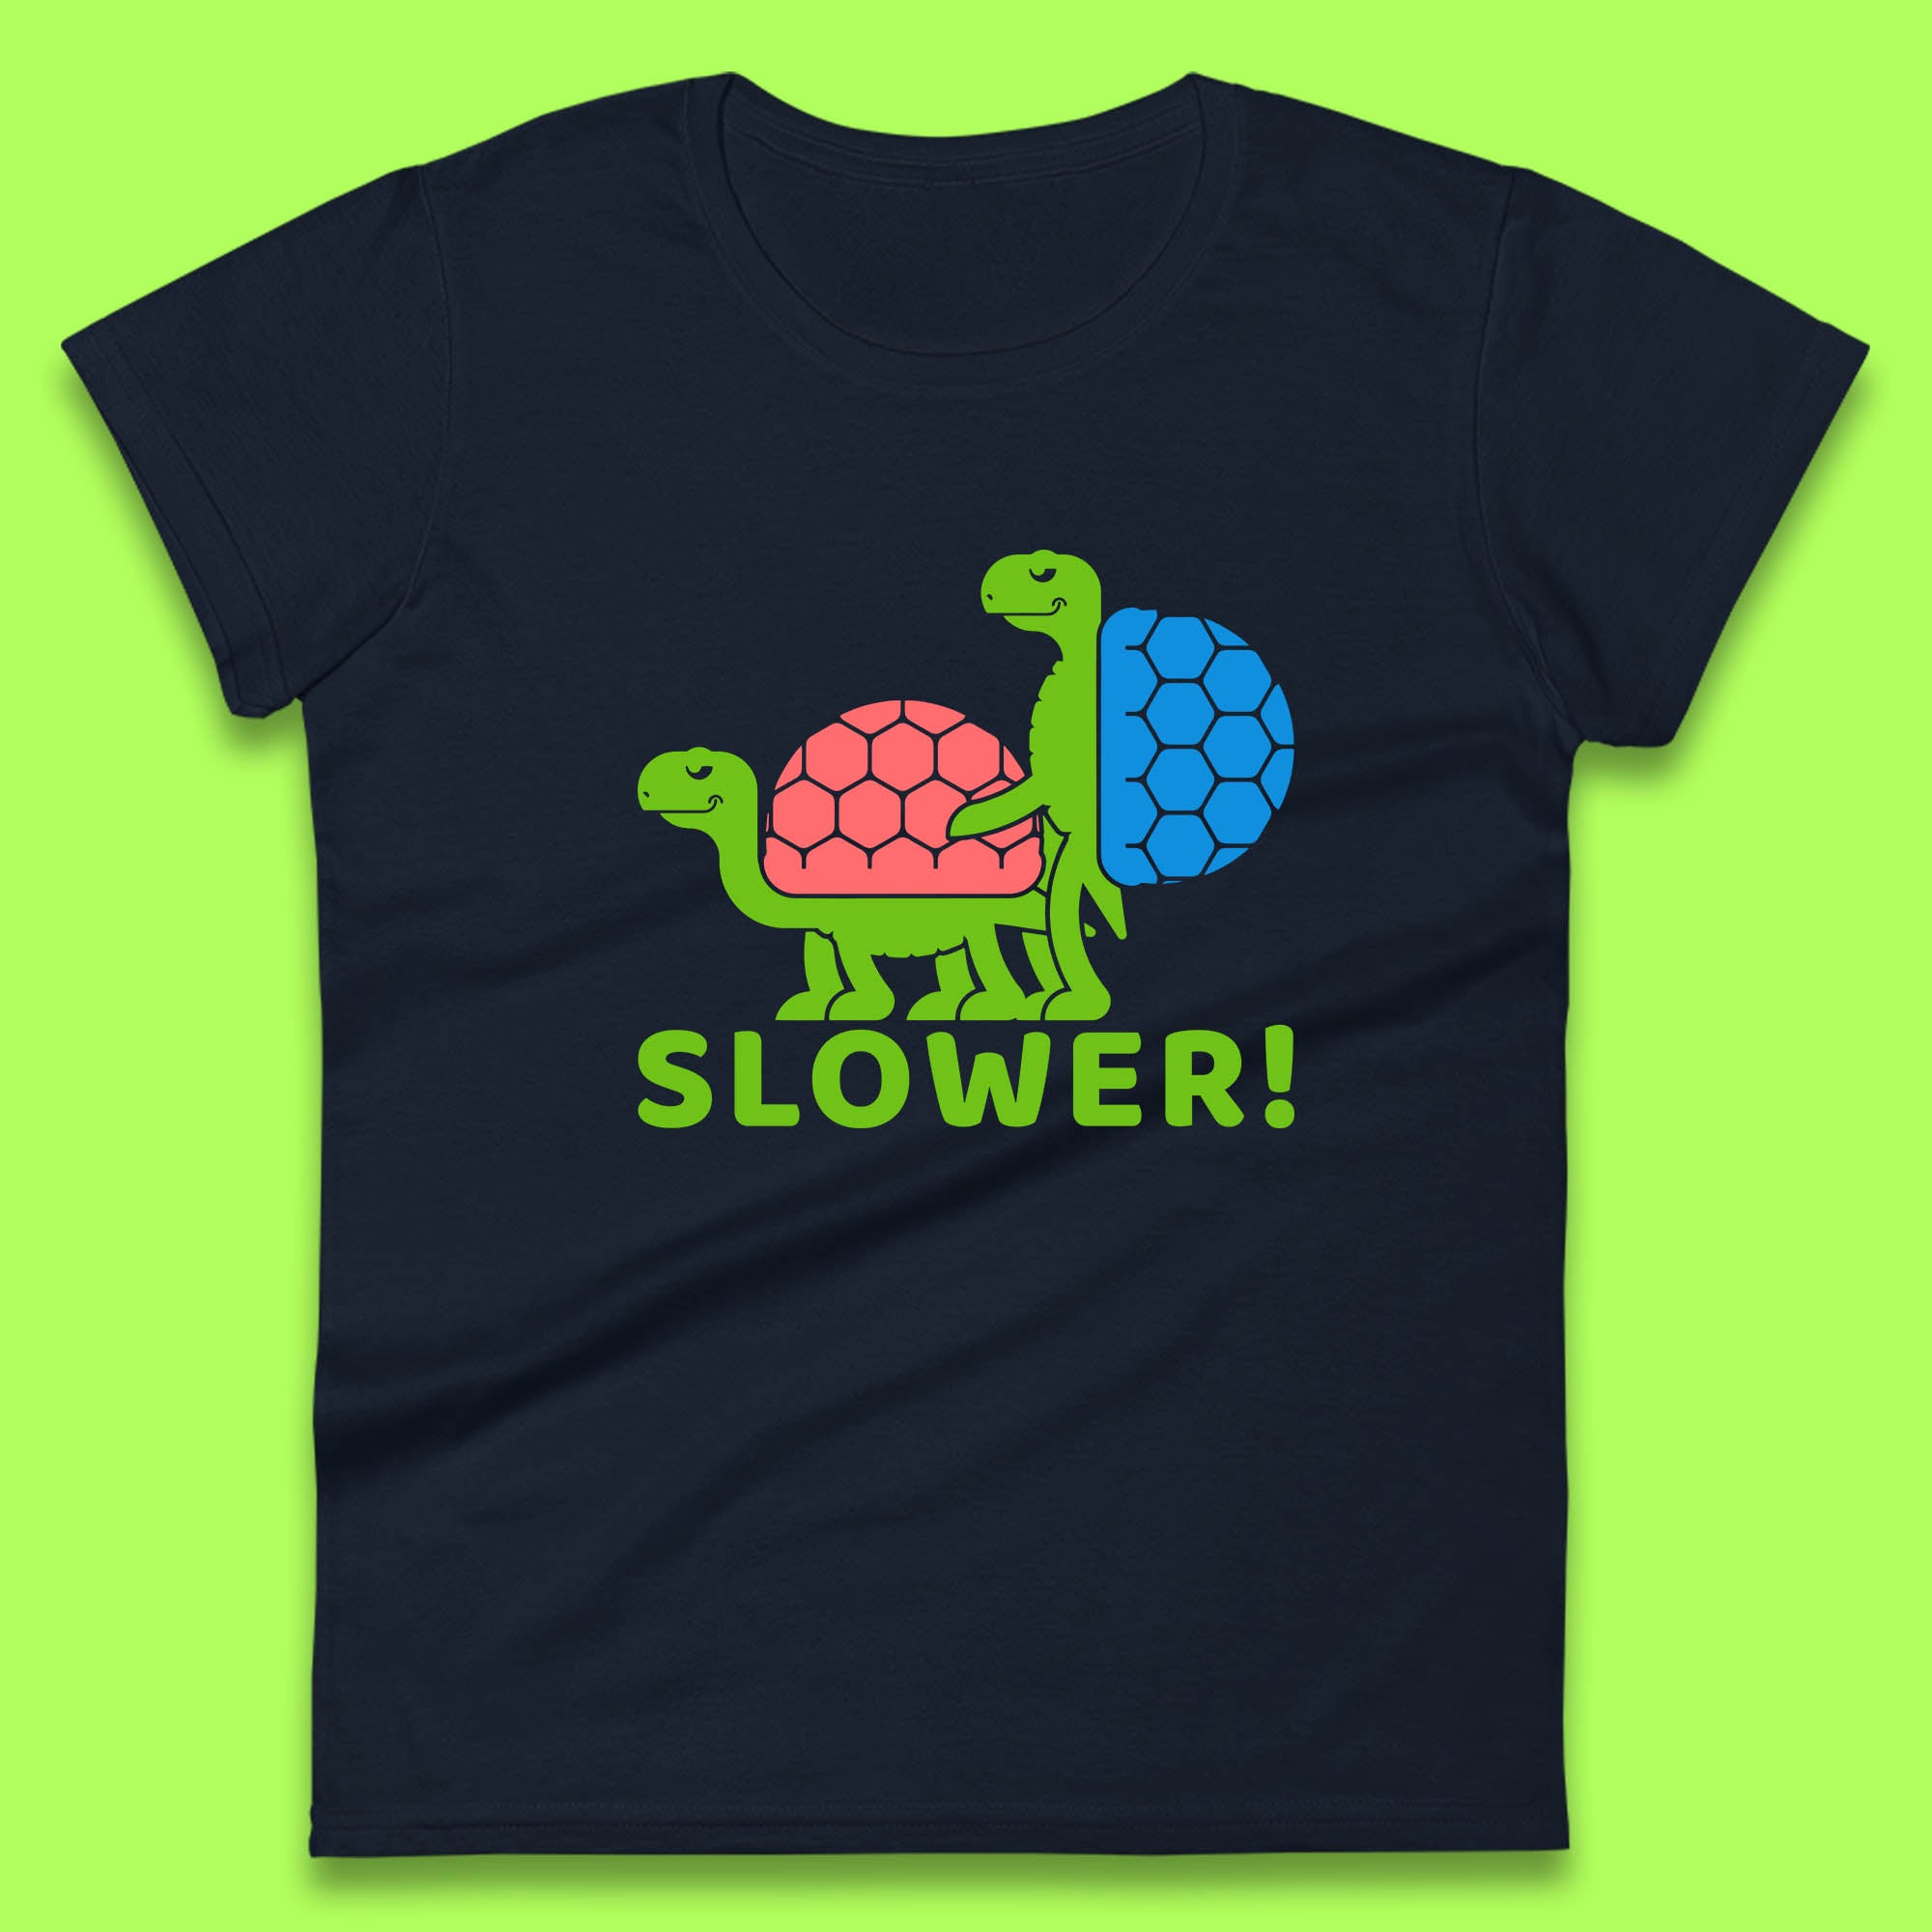 Sea Turtle Sex Tortoise Intercourse Animal Reproduction Funny Slower Offensive Ocean Life Lover Womens Tee Top